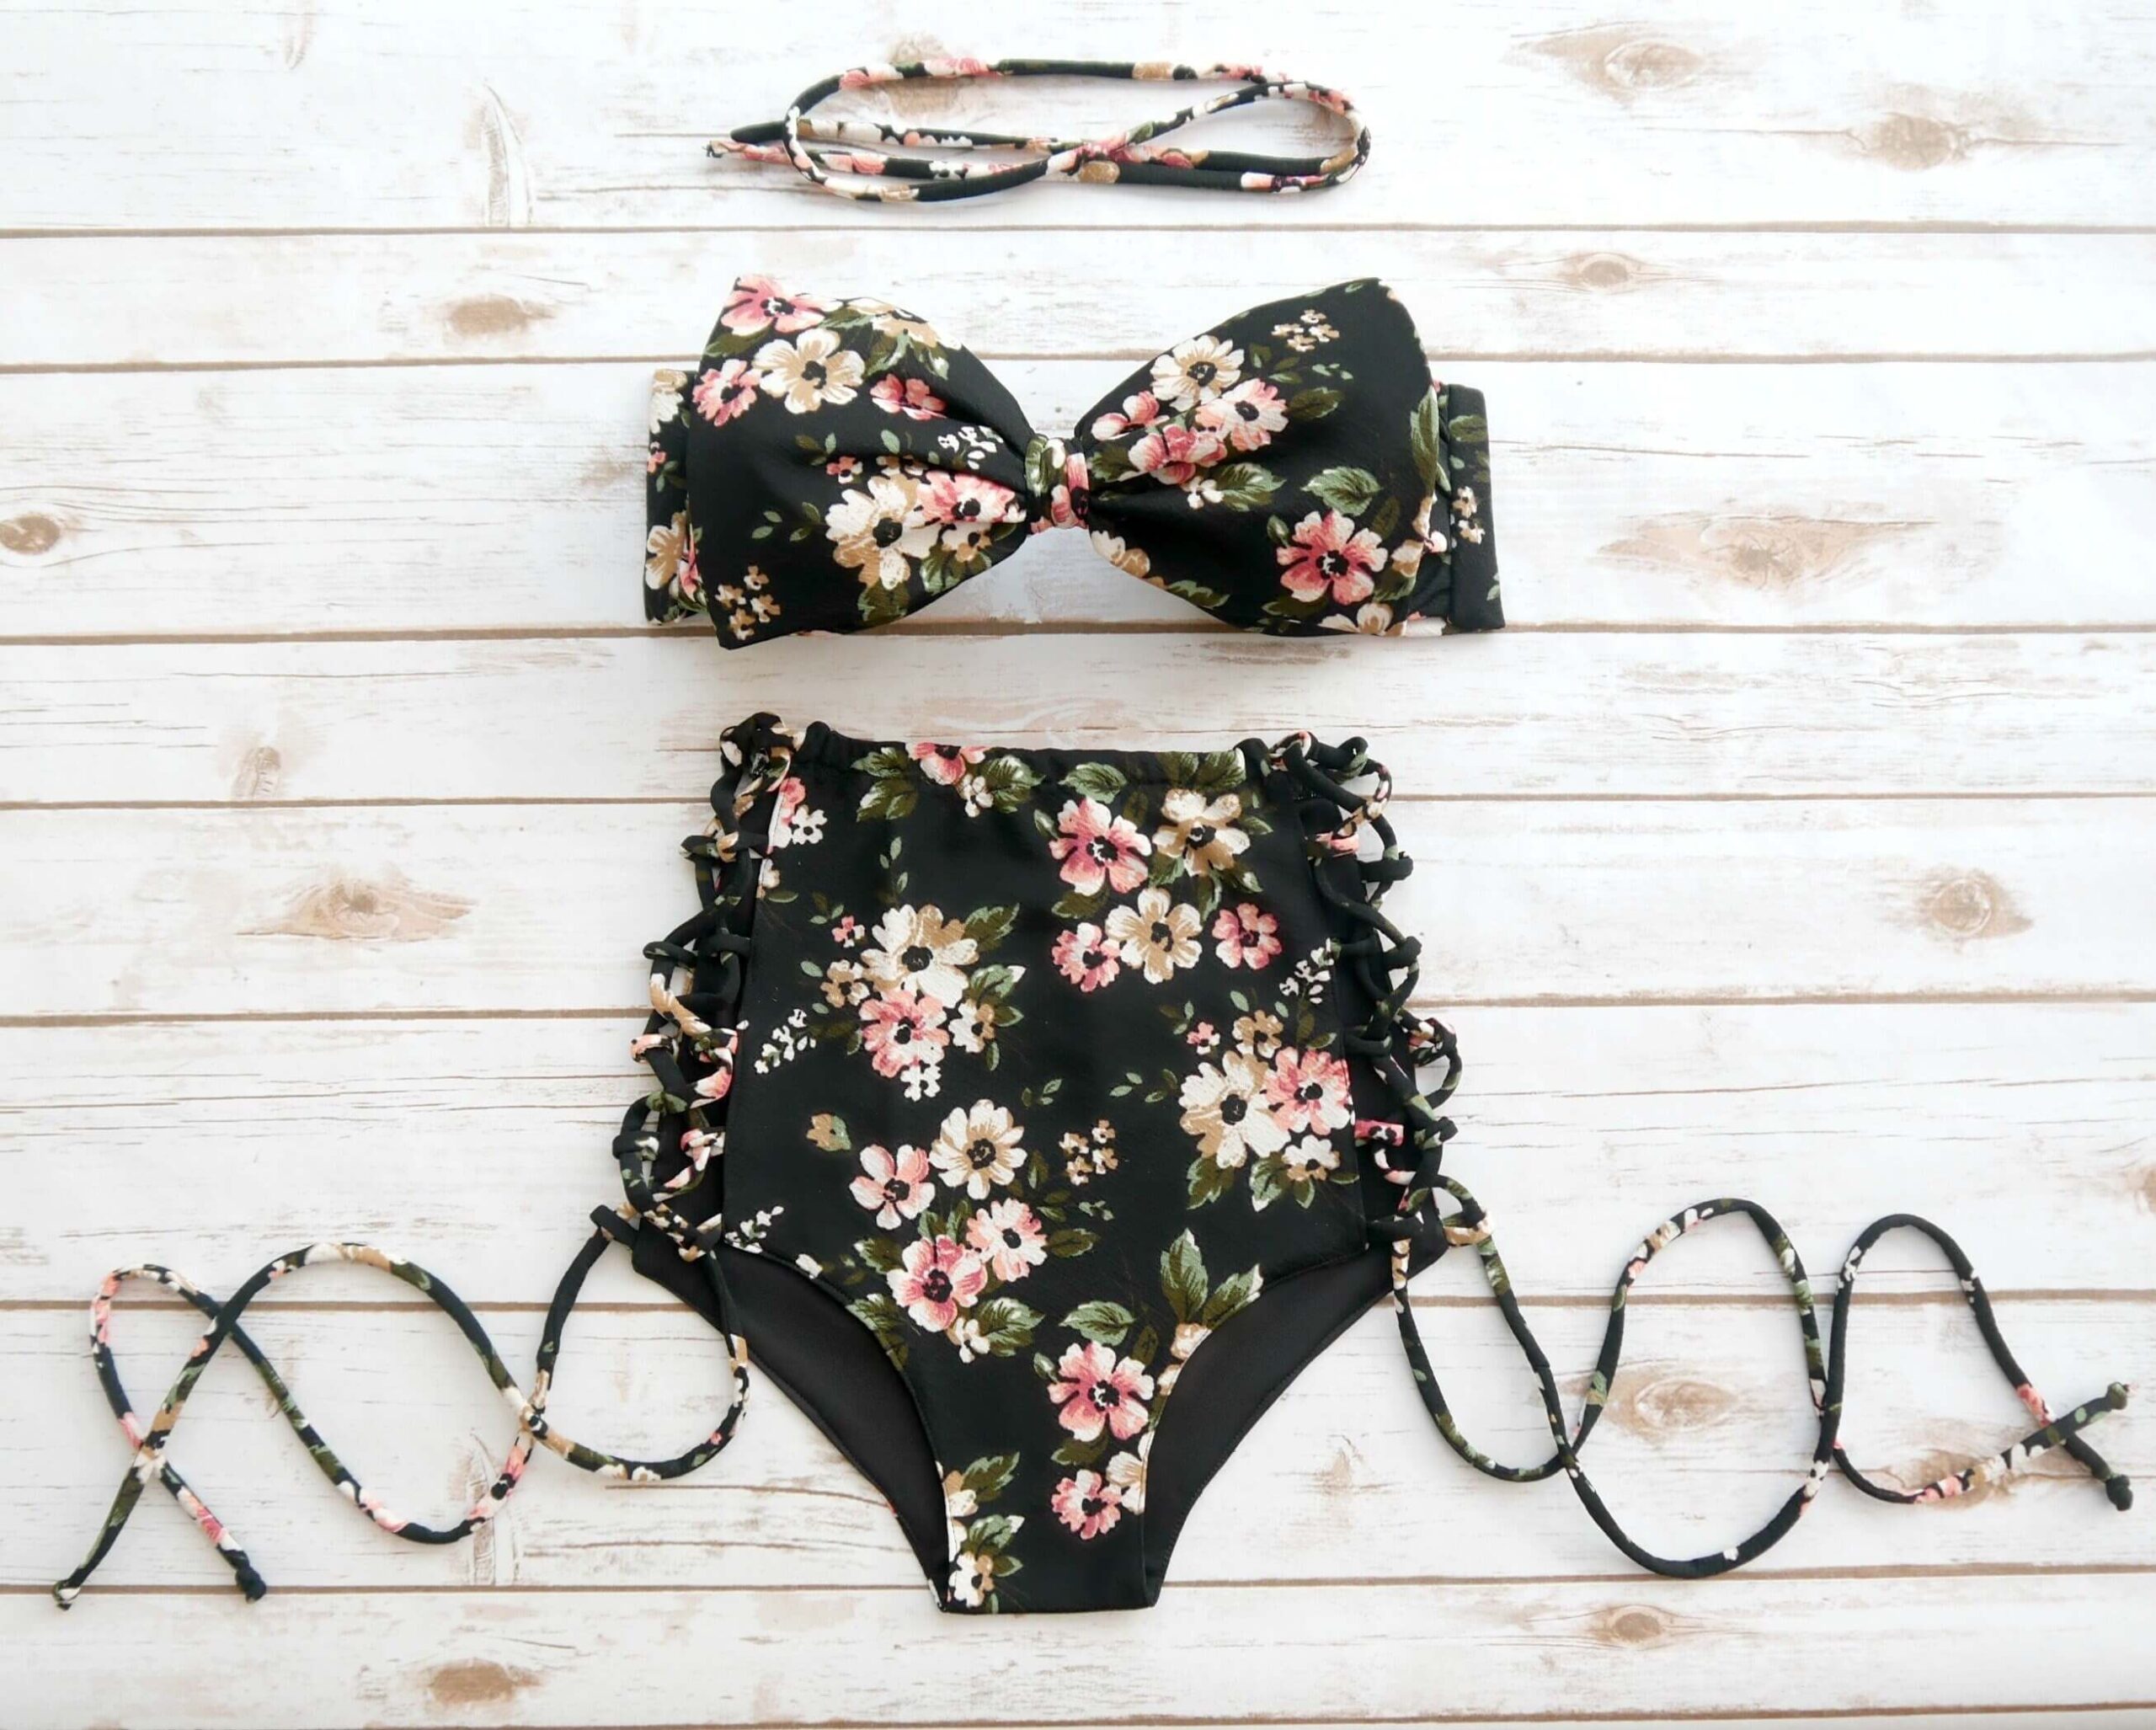 High Waisted Cheeky Bikini A Trend You Don T Want To Miss The Mews Beauty